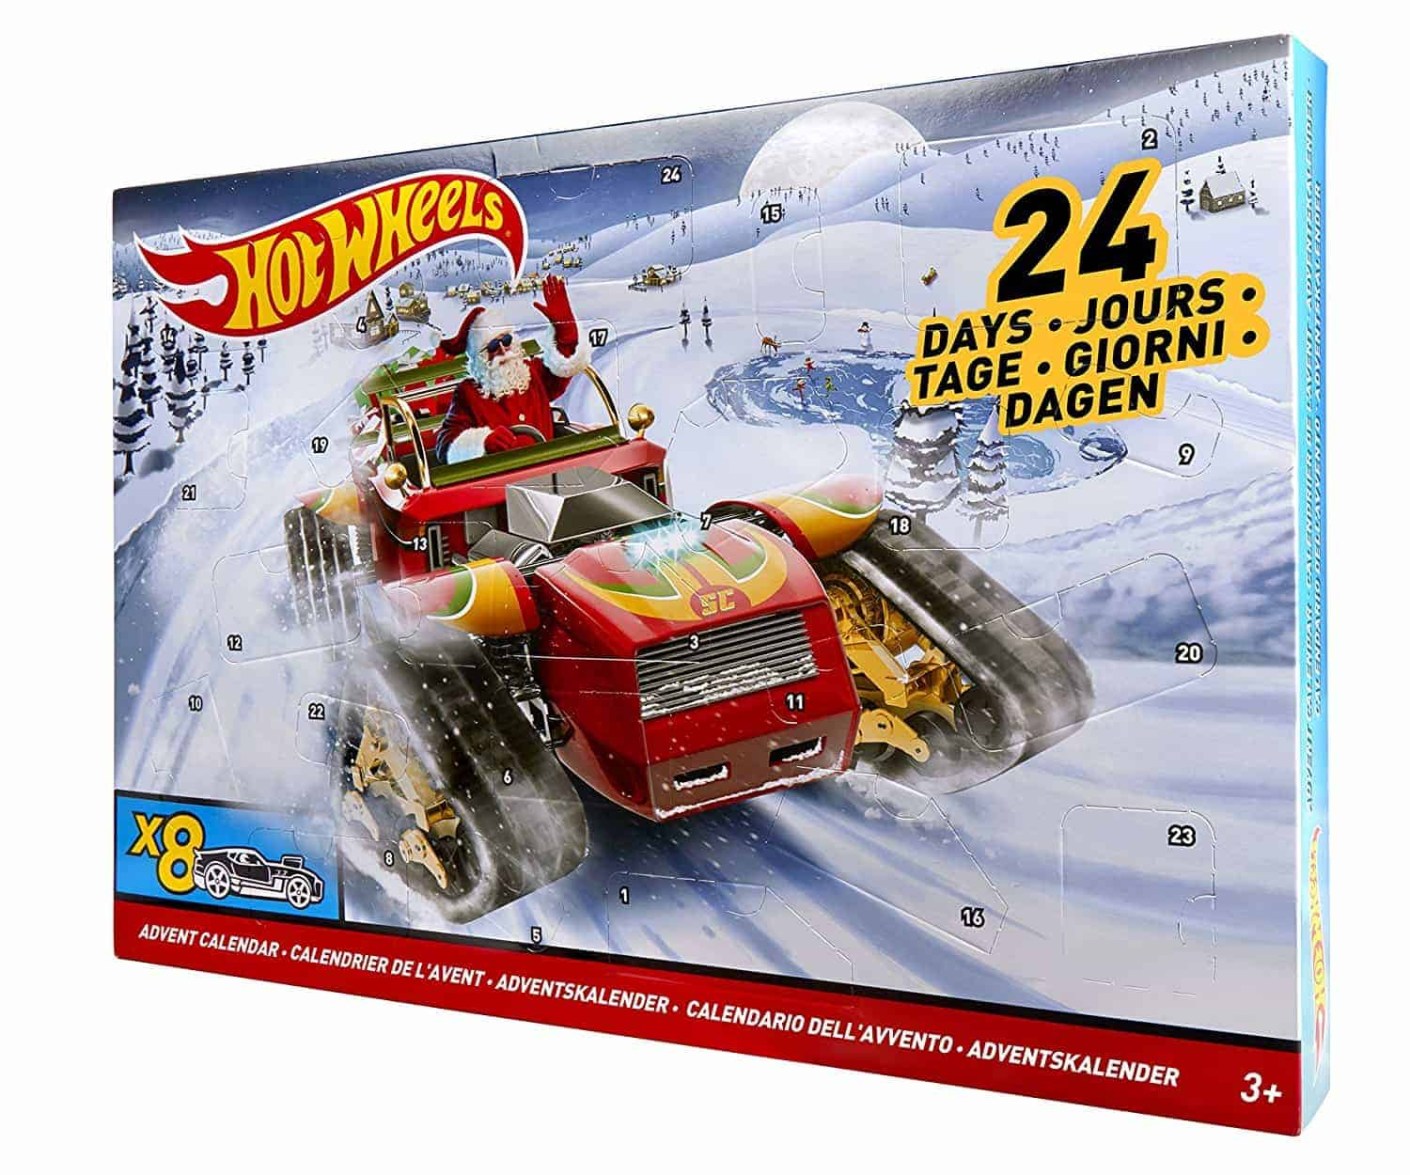 Hot Wheels Advent Calendar Reviews: Get All The Details At Hello